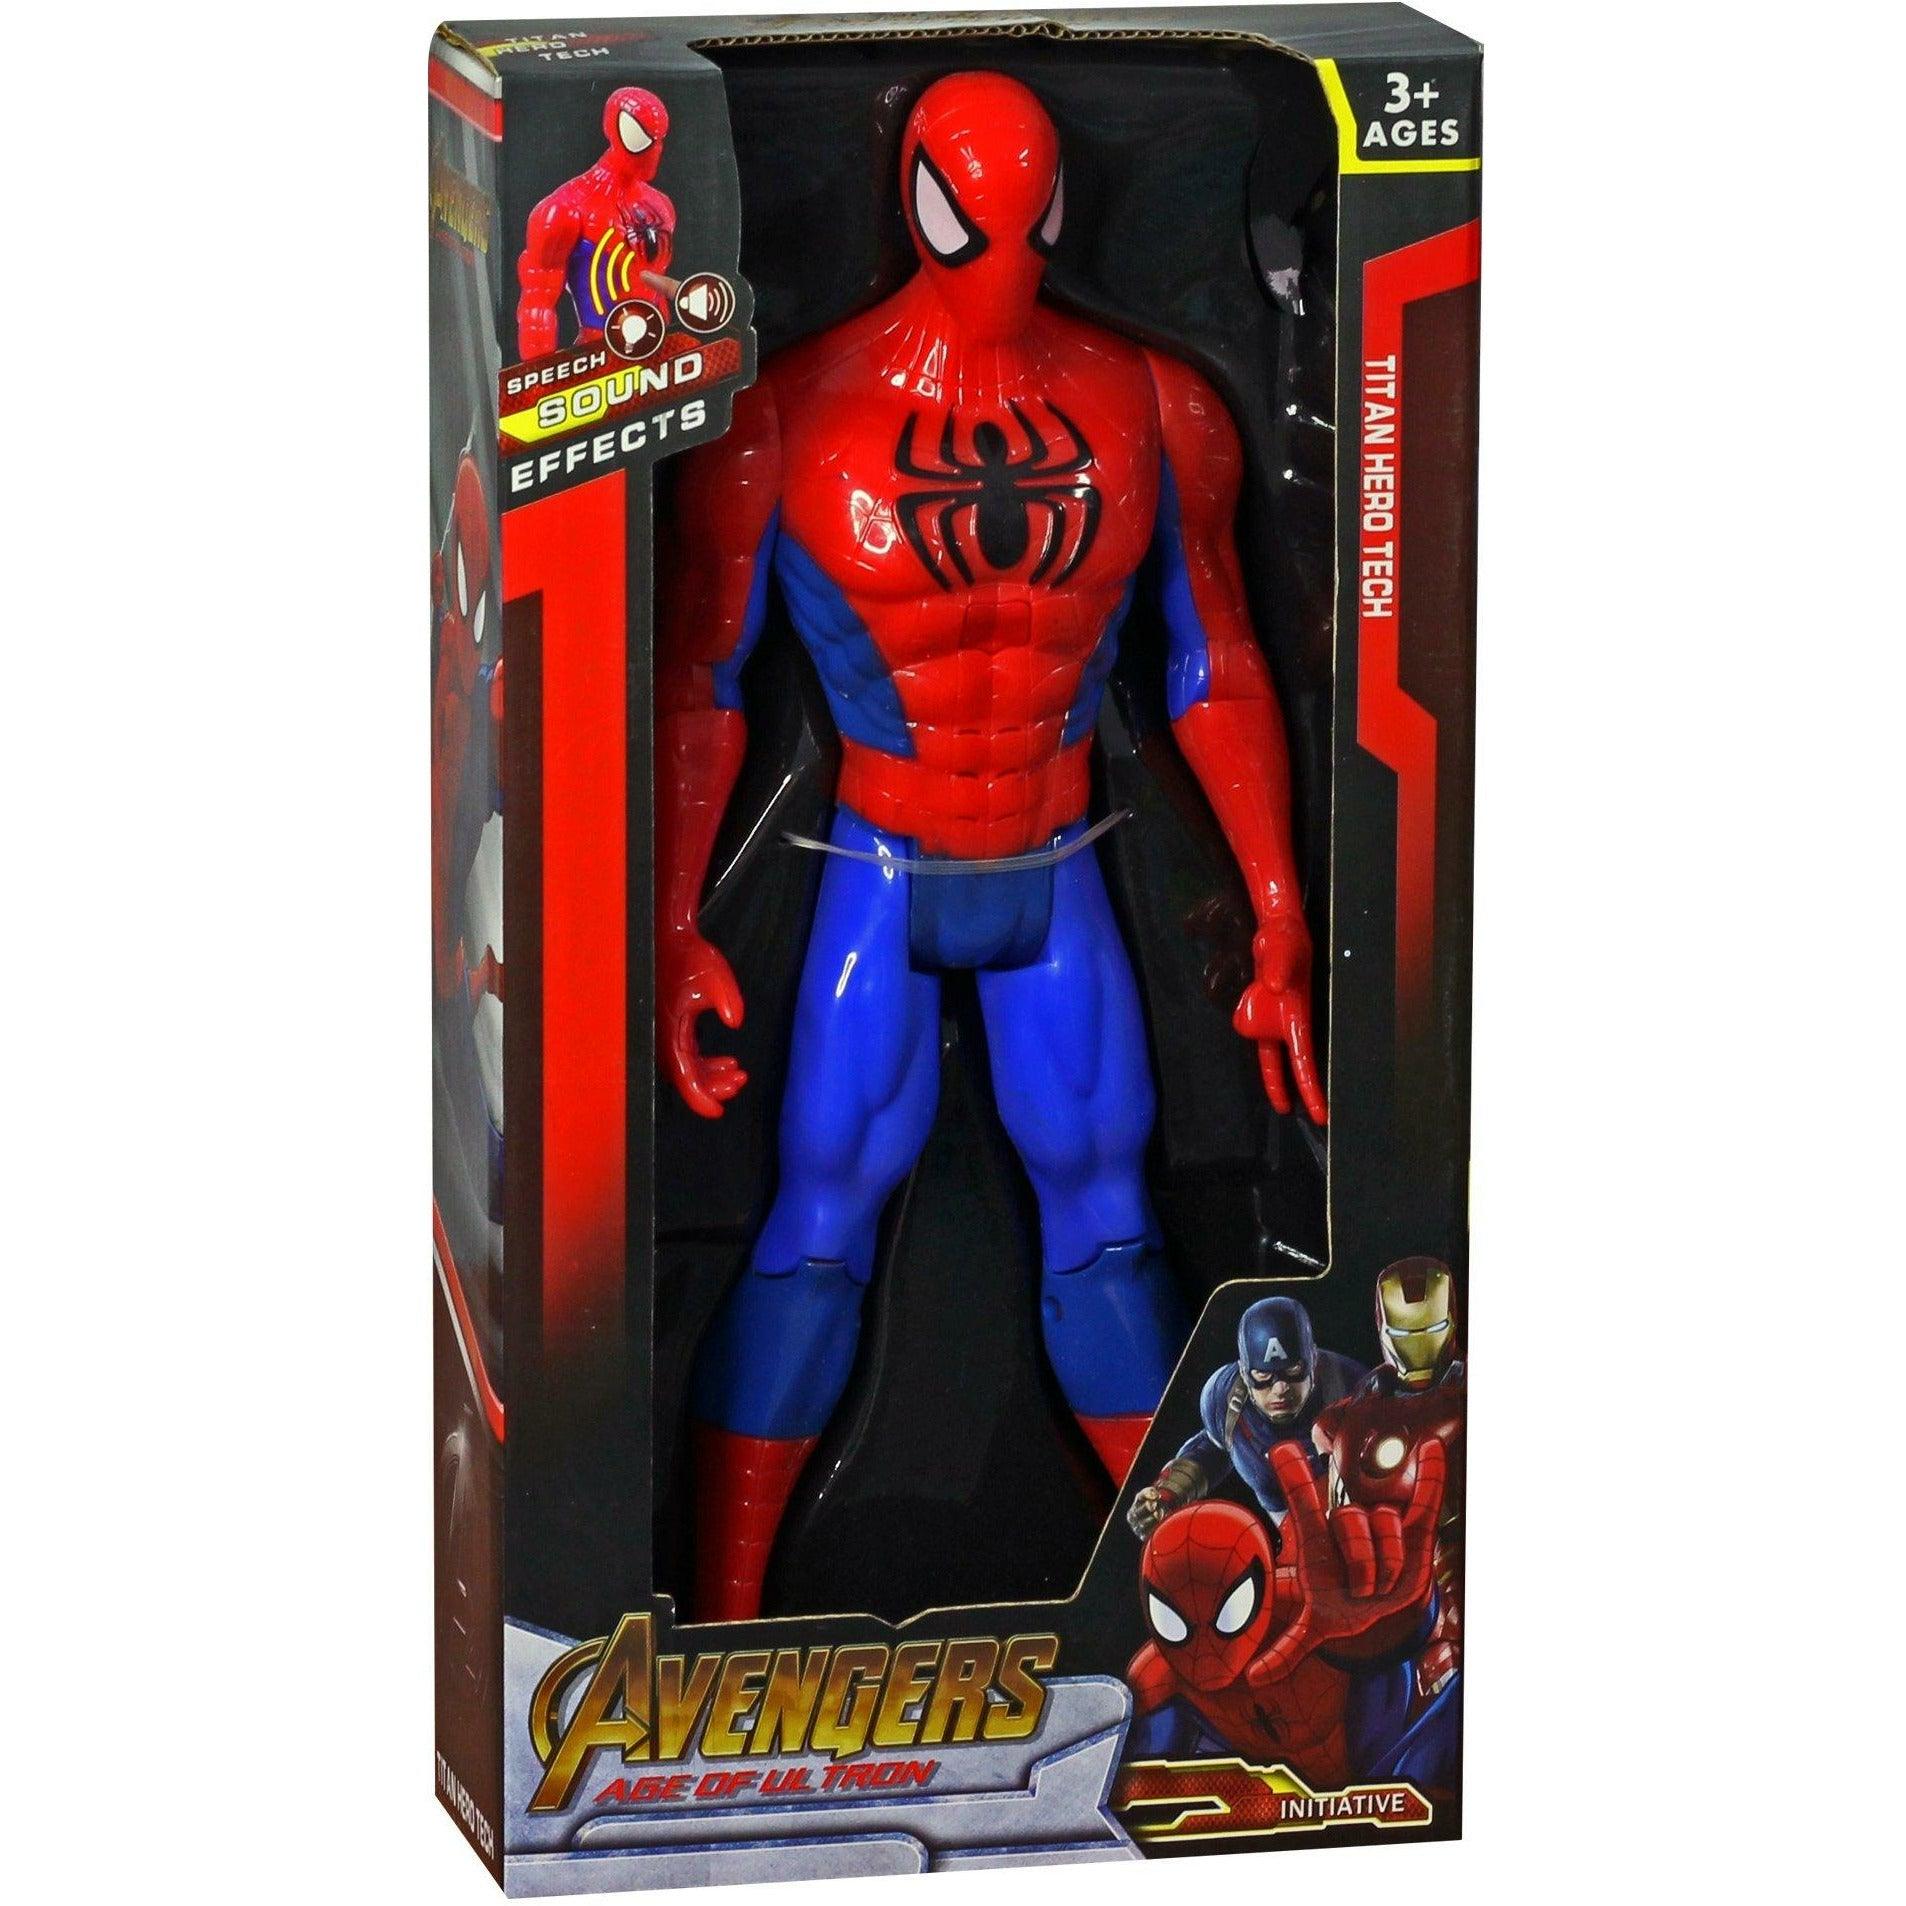 Avengers Union Legend of Ultron - Spiderman - BumbleToys - 5-7 Years, Avengers, Boys, Figures, Spider man, Spiderman, Toy Land